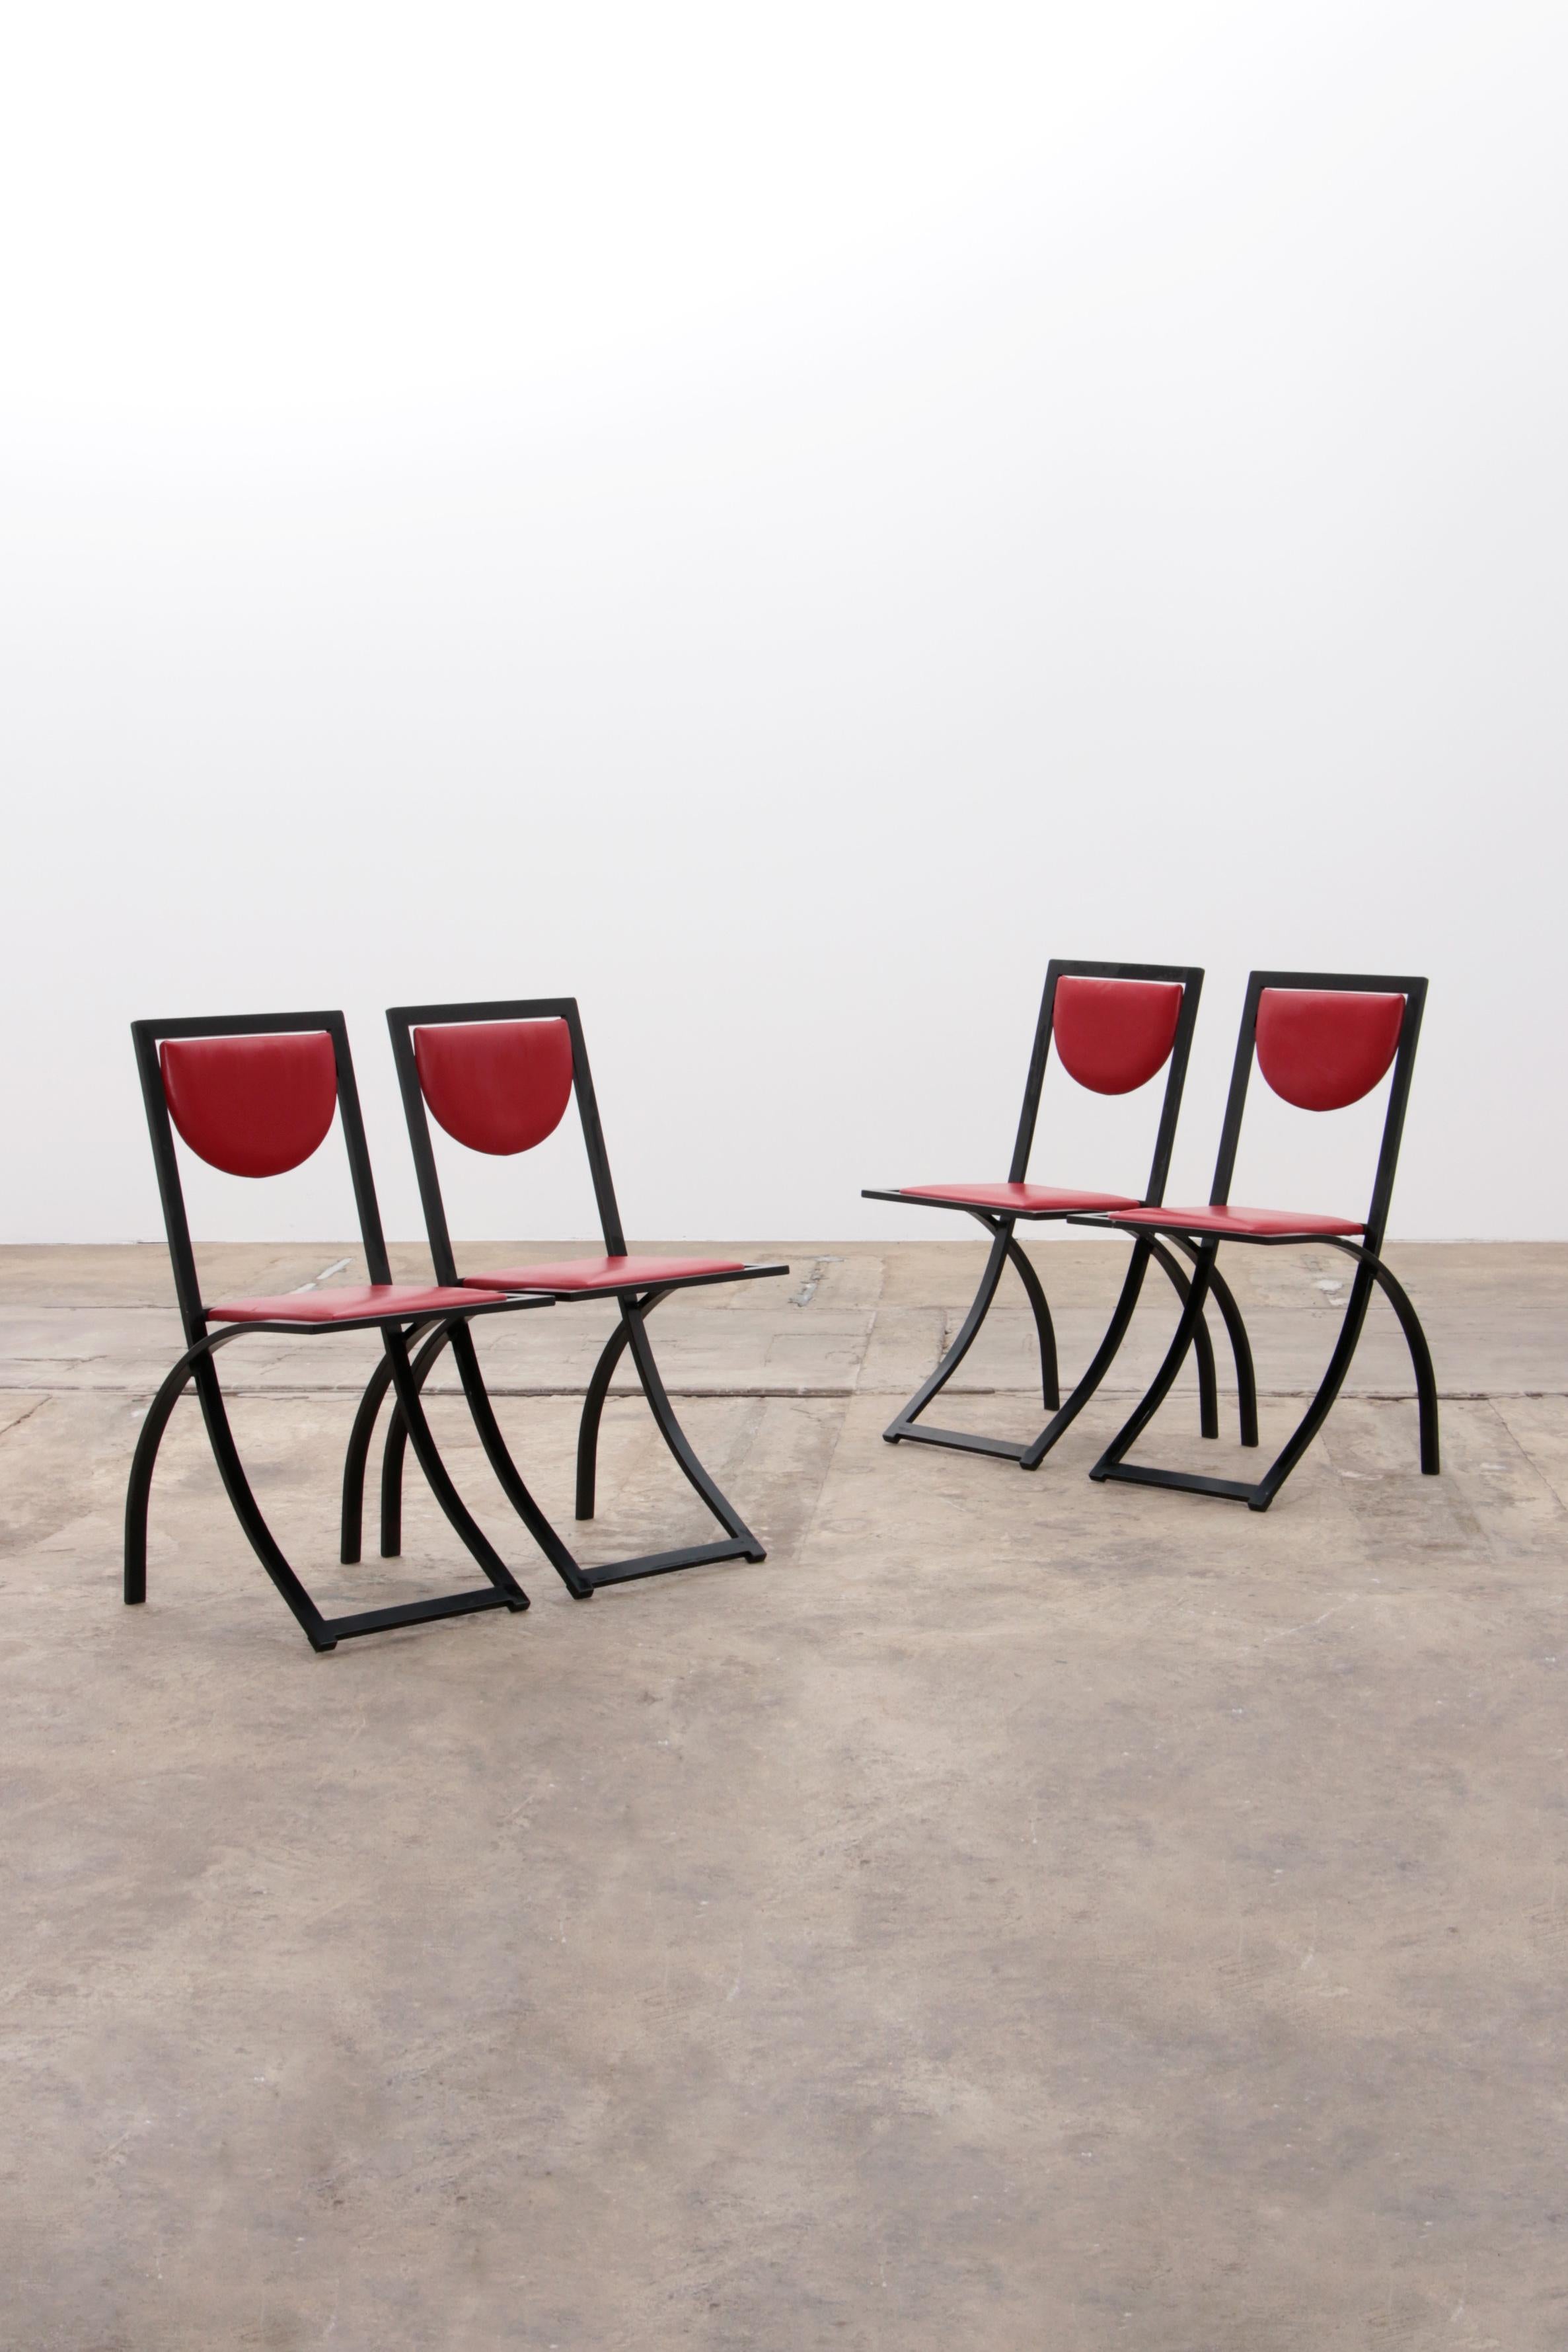 Vintage Sine Chairs by Karl Friedrich Förster - Set of 4

Discover the iconic Sinus chairs, designed by Karl-Friedrich Förster in 1984, a true eye-catcher in any interior. This set of four chairs, produced by KFF Design in the heart of the German